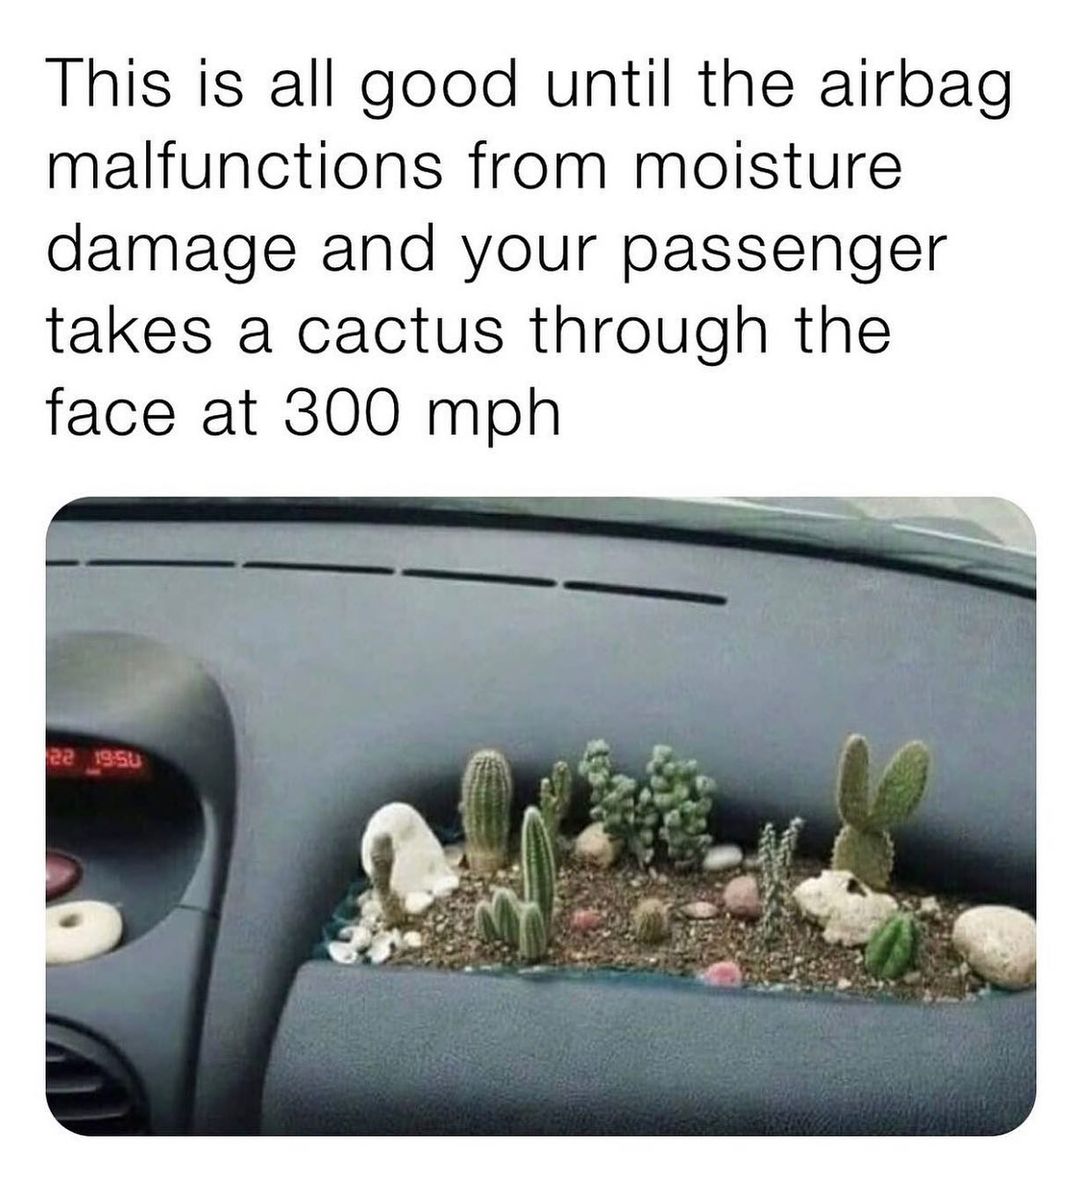 This is all good until the airbag malfunctions from moisture damage and your passenger takes a cactus through the face at 300 mph.